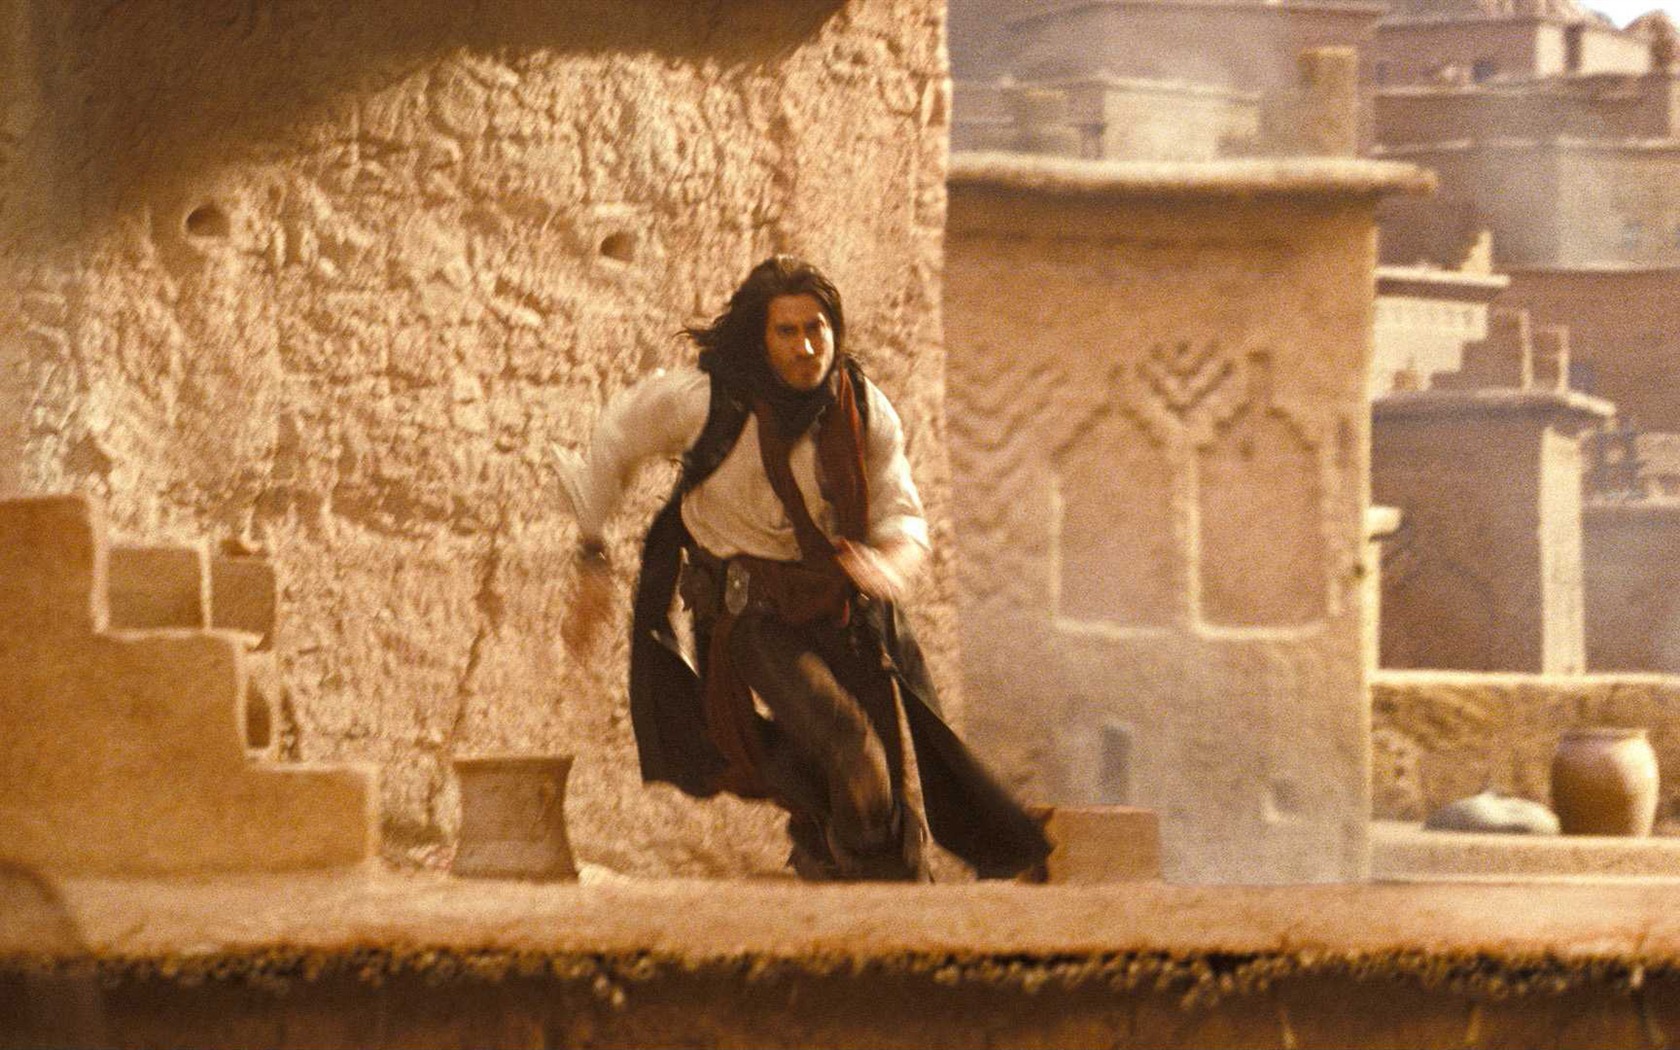 Prince of Persia The Sands of Time 波斯王子：时之刃34 - 1680x1050